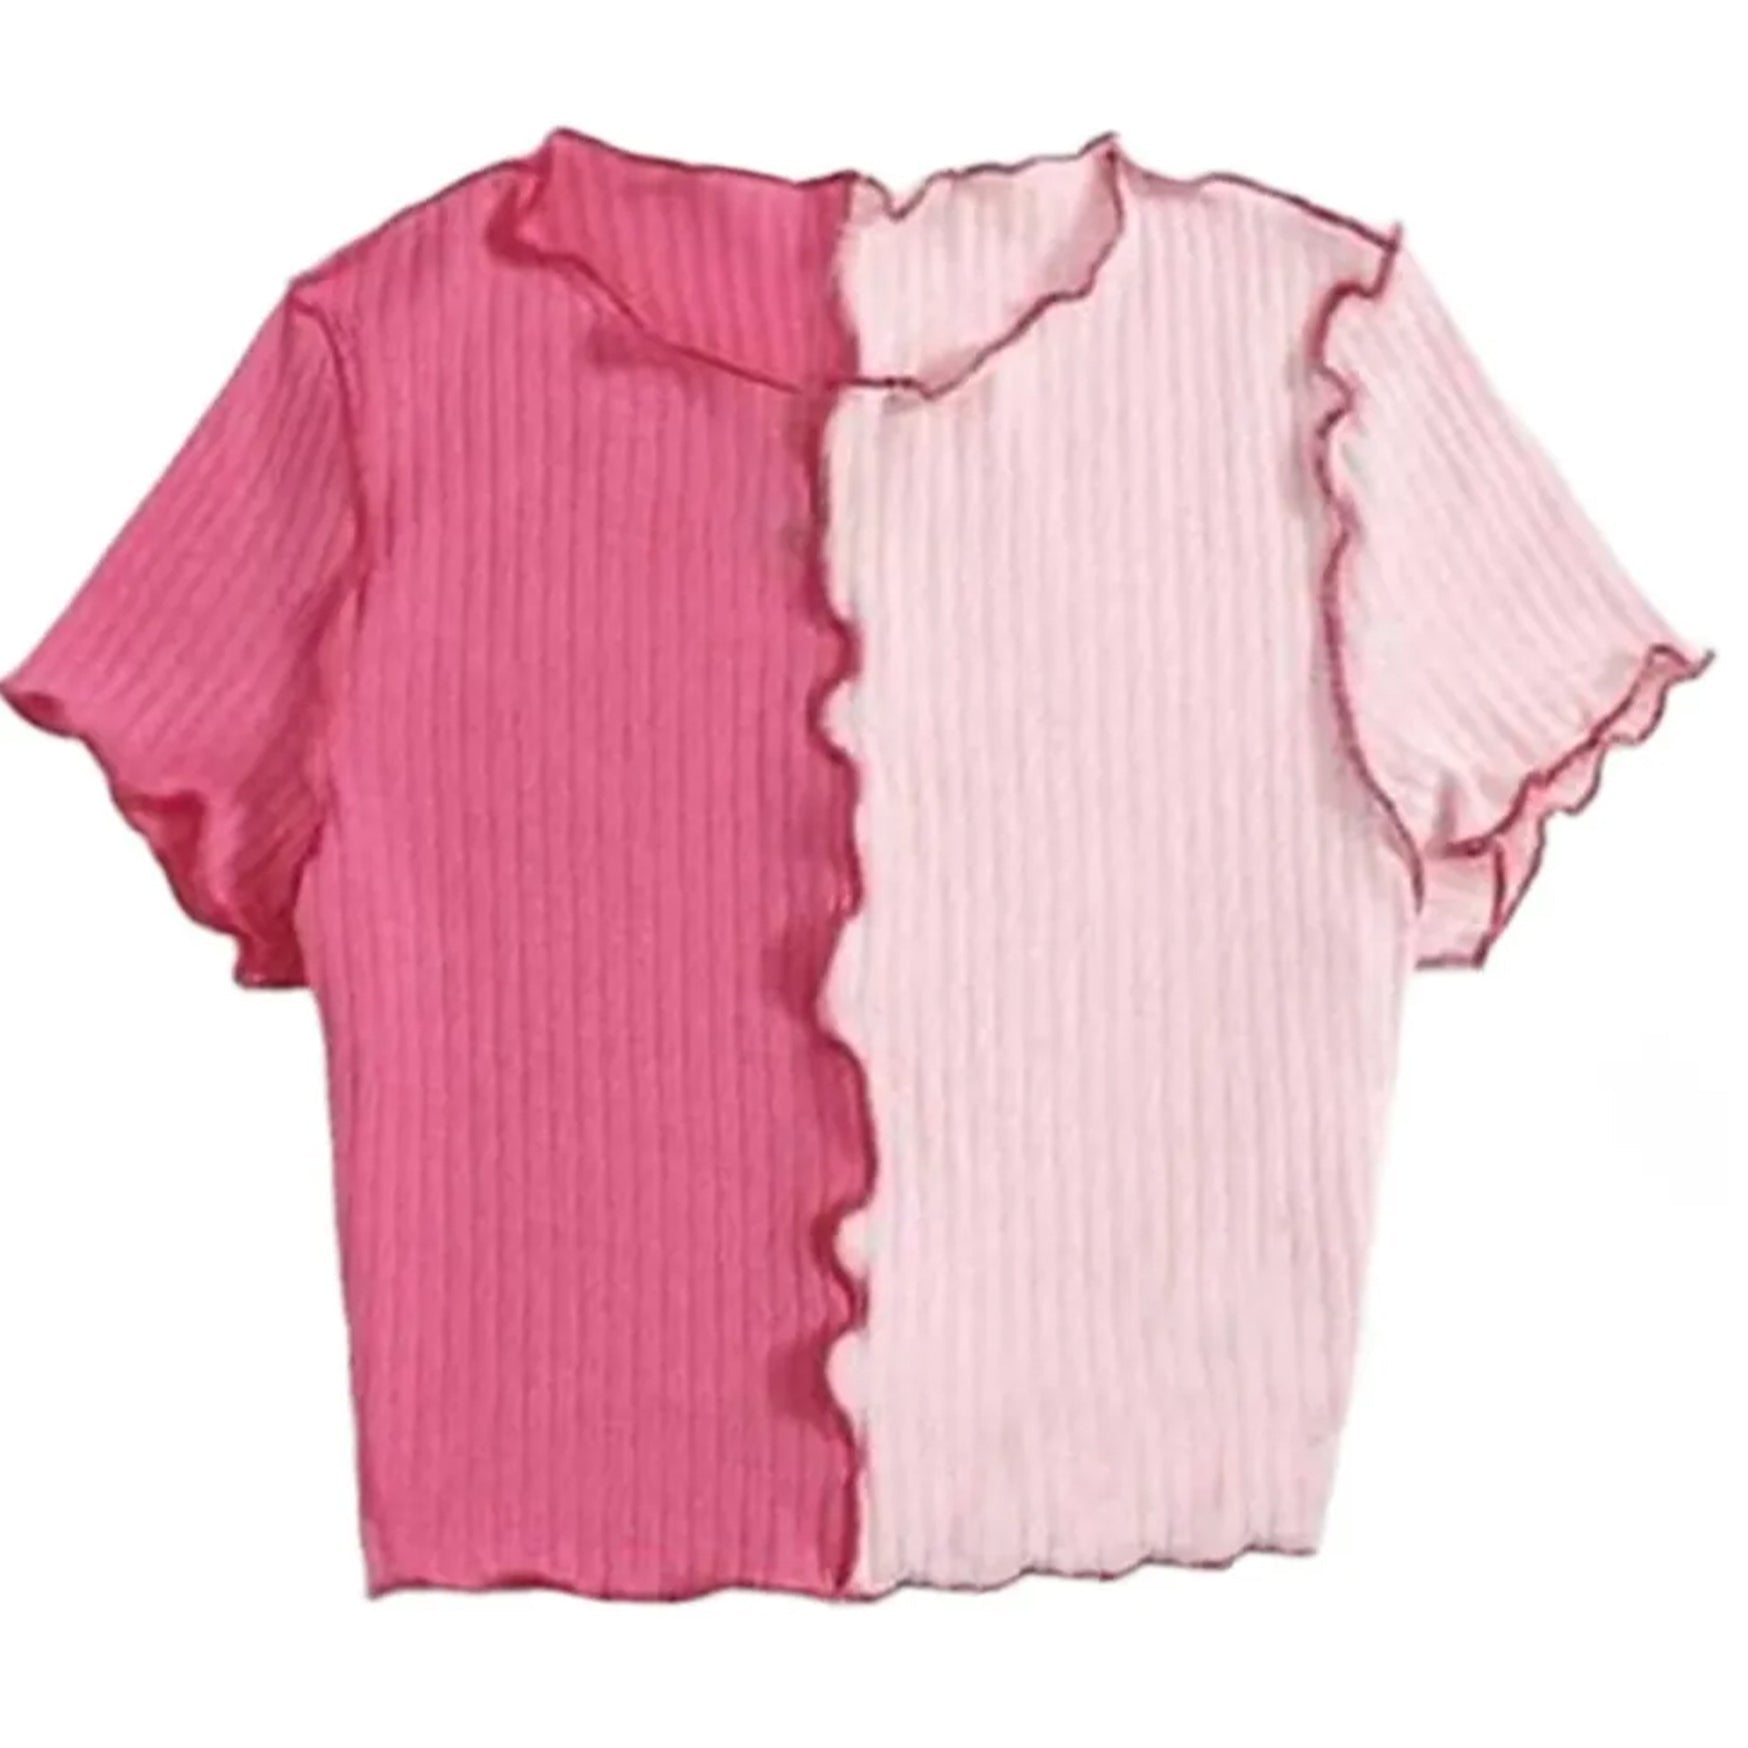 Khhalisi Rib Pink Crop Tops for Womens (S)